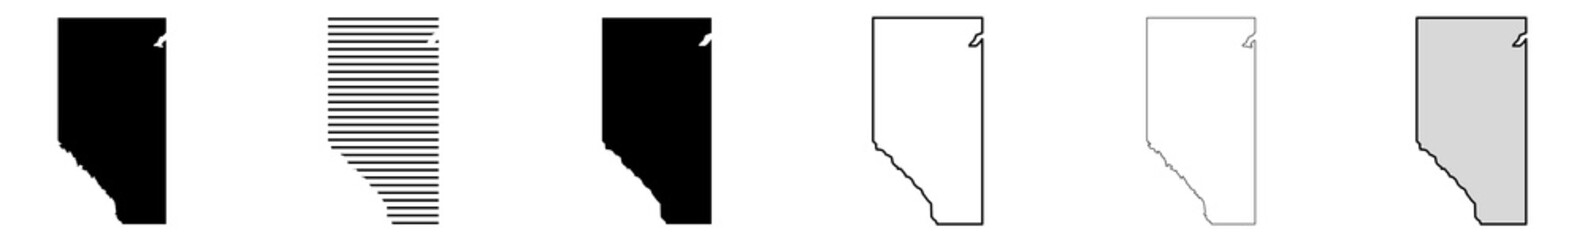 Alberta Map Black | Province Border | Canada State | Canadian | America | Transparent Isolated | Variations